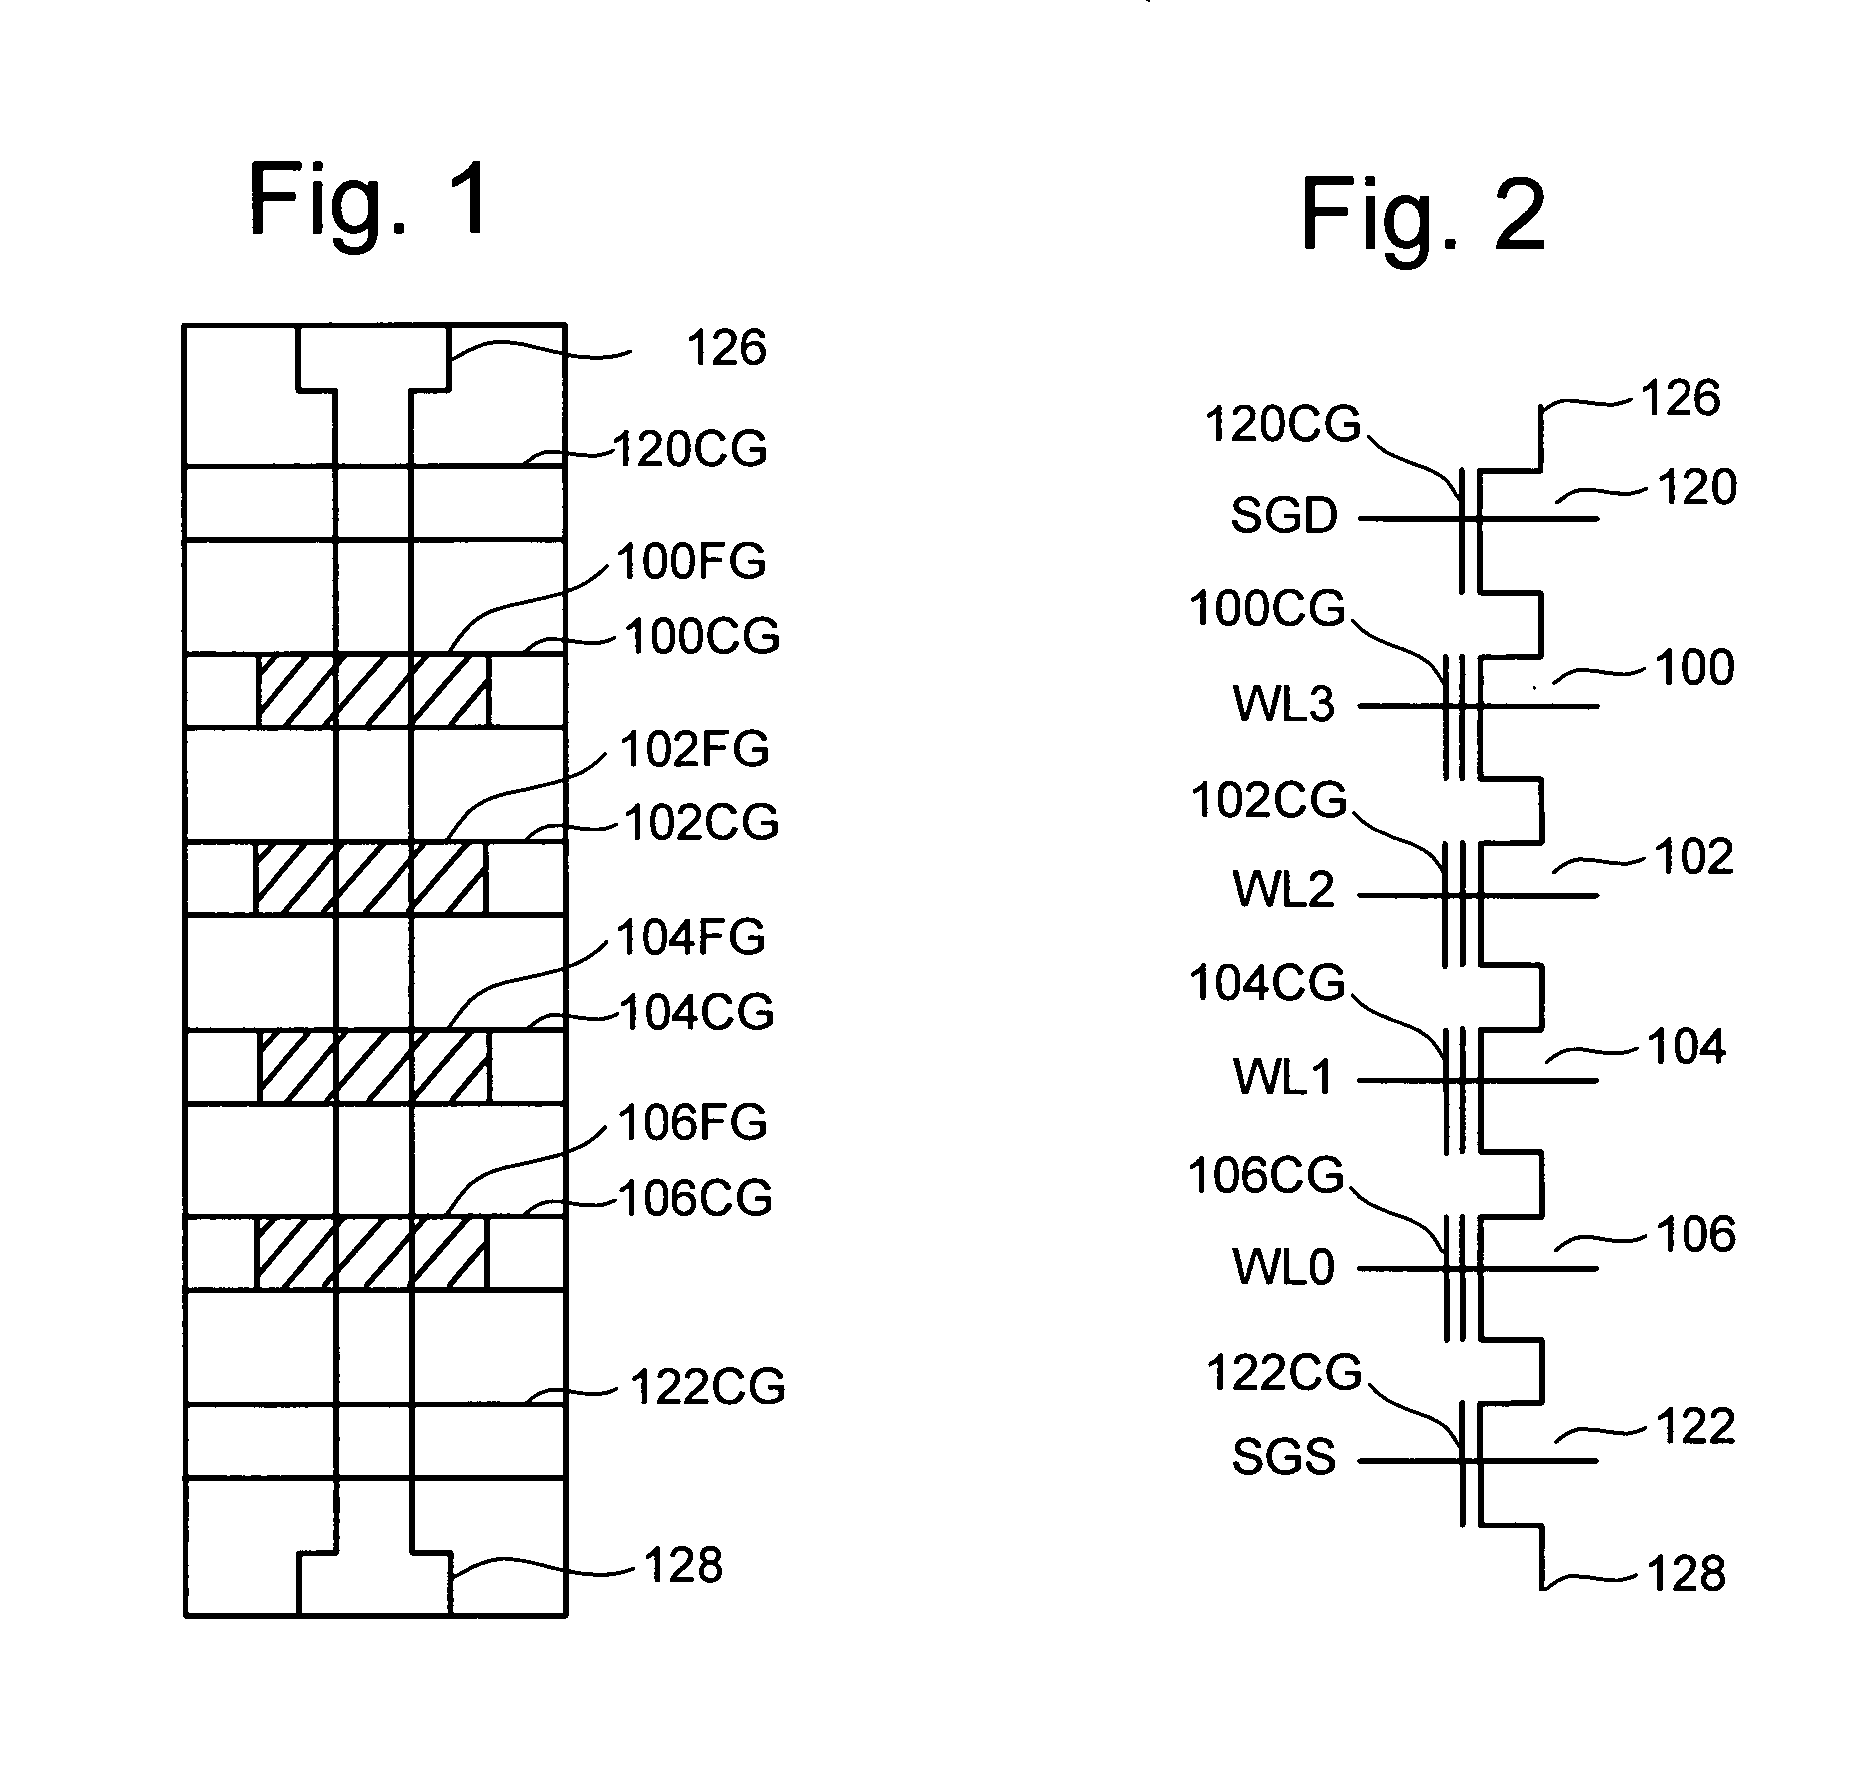 Erasing non-volatile memory using individual verification and additional erasing of subsets of memory cells